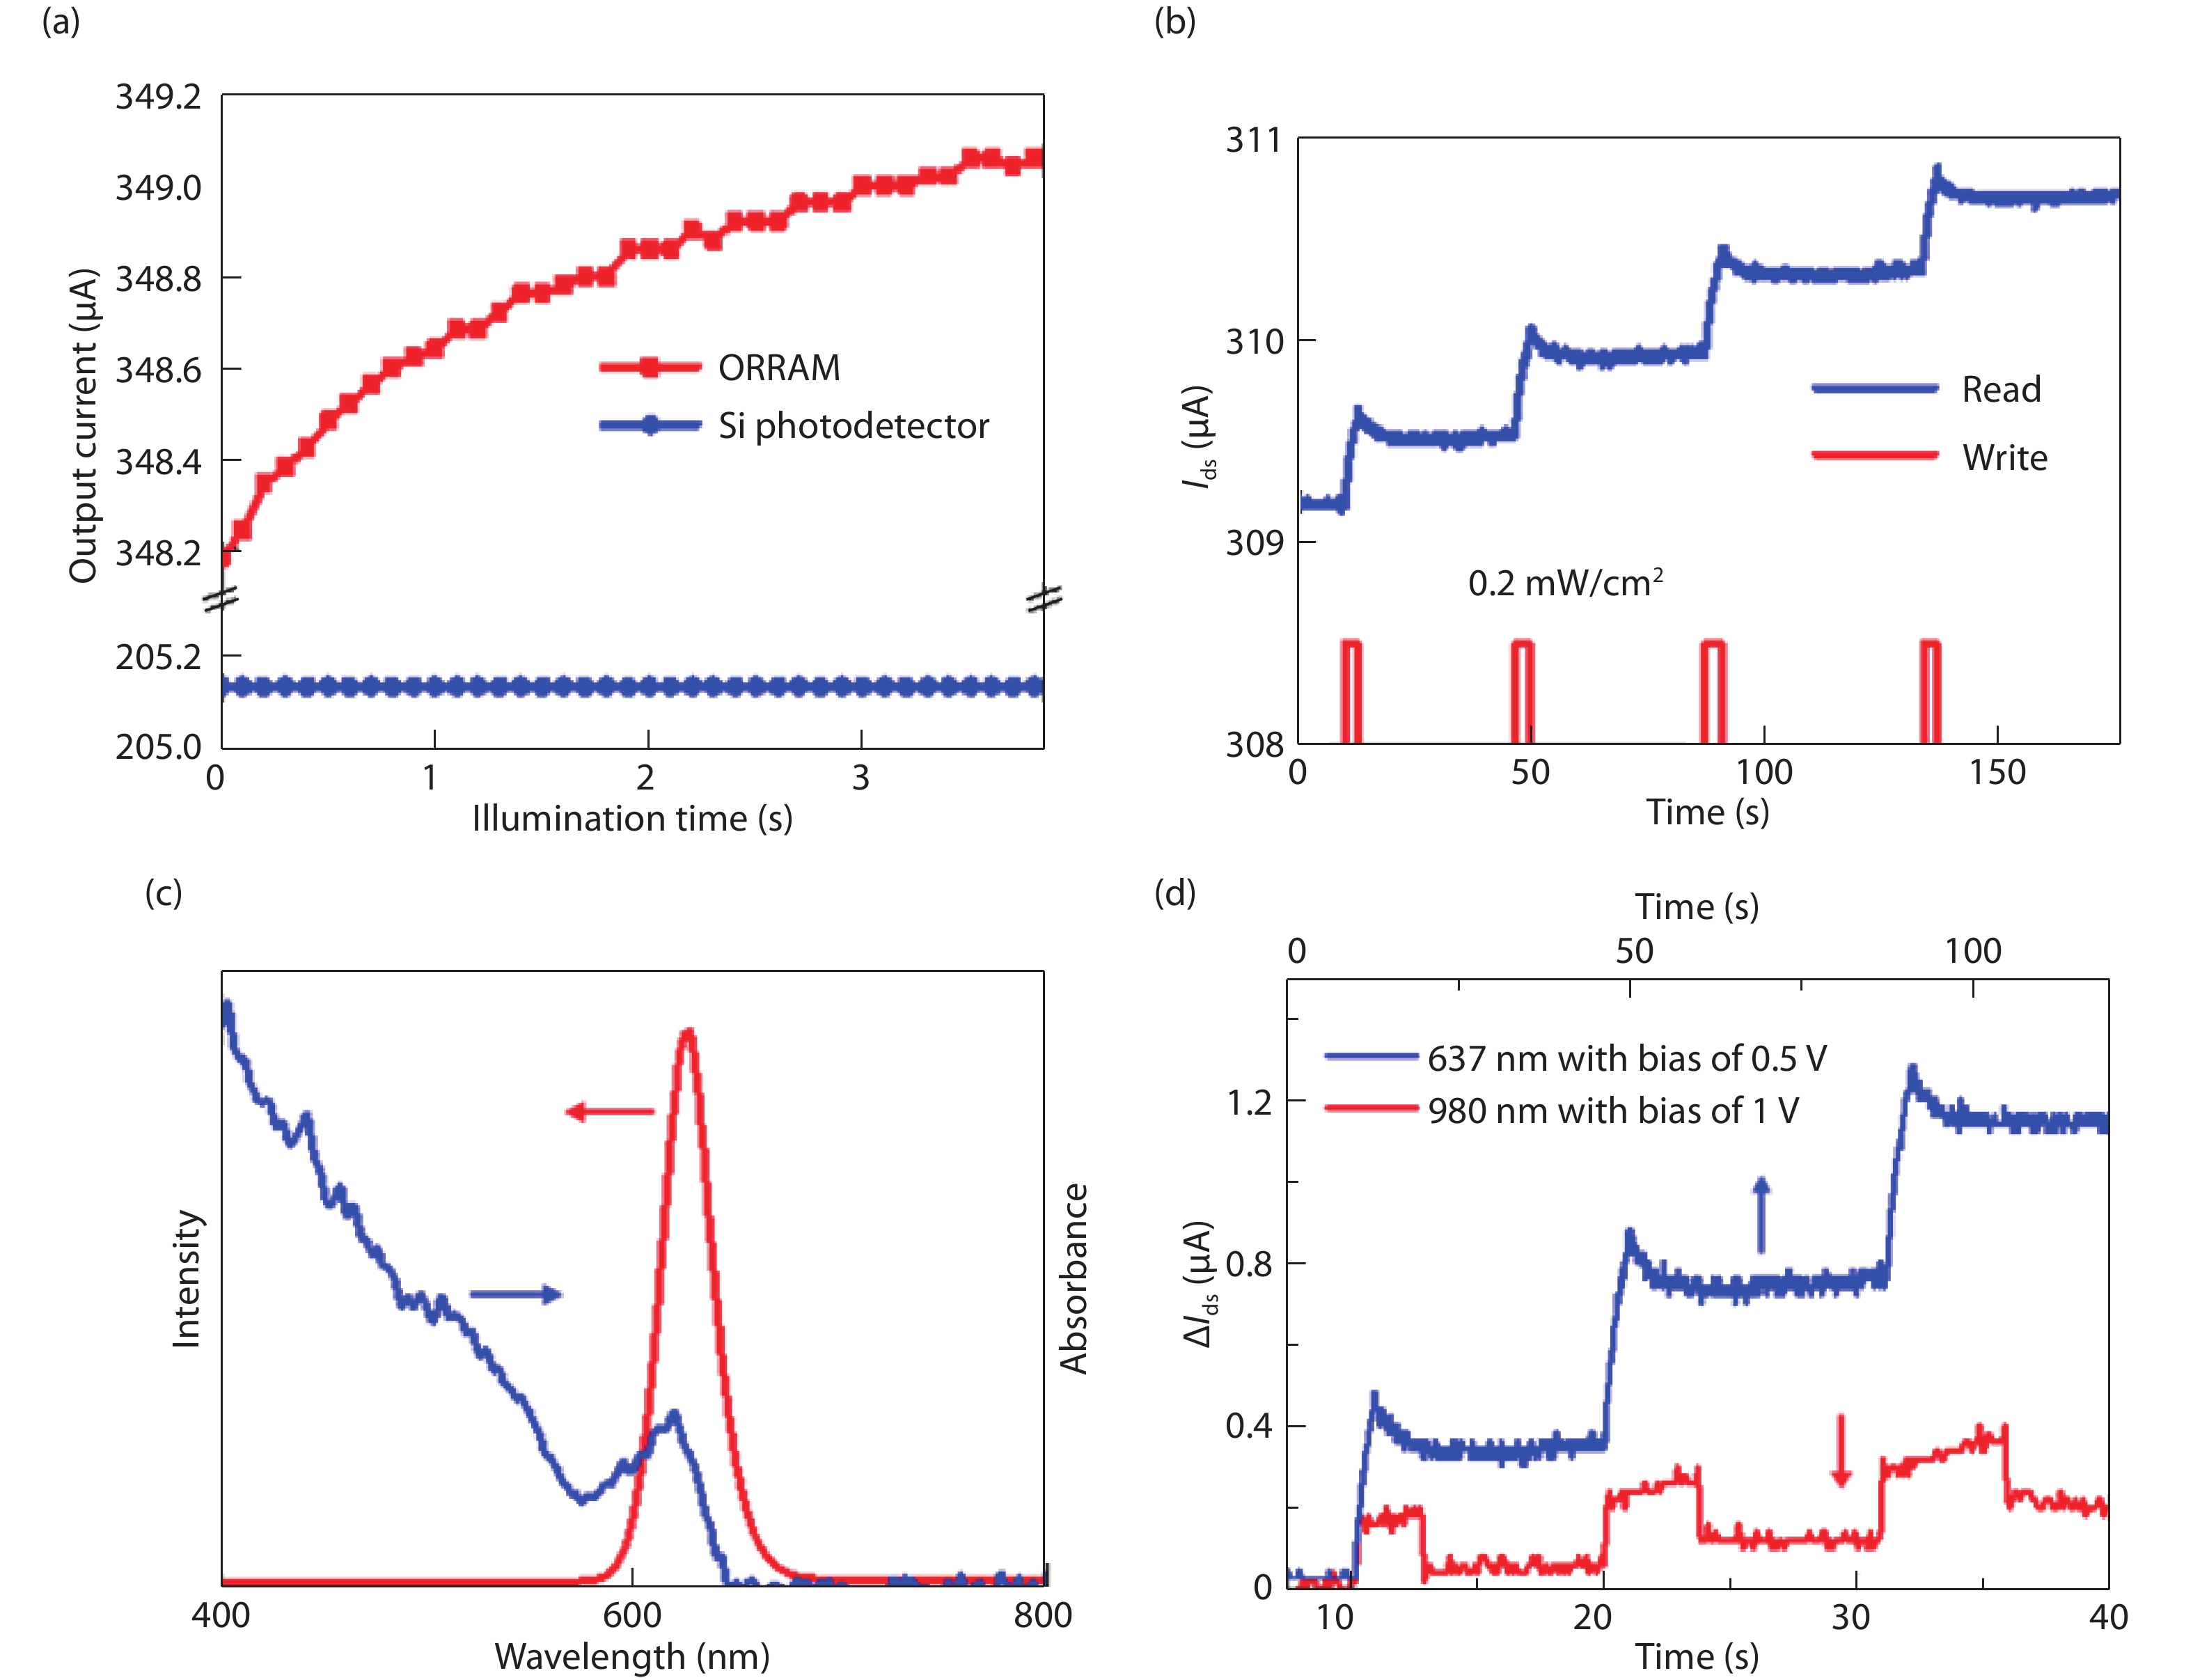 (Color online) (a) Illumination time dependence of output current of a conventional commercial Si photodetector (blue) and our ORRAM synaptic device (red). (b) The non-volatile optical storage characteristic of the ORRAM device. A laser pulse of 637 nm with 0.2 mW/cm2 is used to write; a 0.5 V bias is applied to read. The pulse width is 3 s. (c) The absorption and photoluminescence spectra of CdSe QDs. (d) Under the light illumination at 980 and 637 nm, the relative increase of Ids of the device under three laser pulses respectively. Under 637 nm excitation, the photocurrent significantly increase, even the bias is halved.